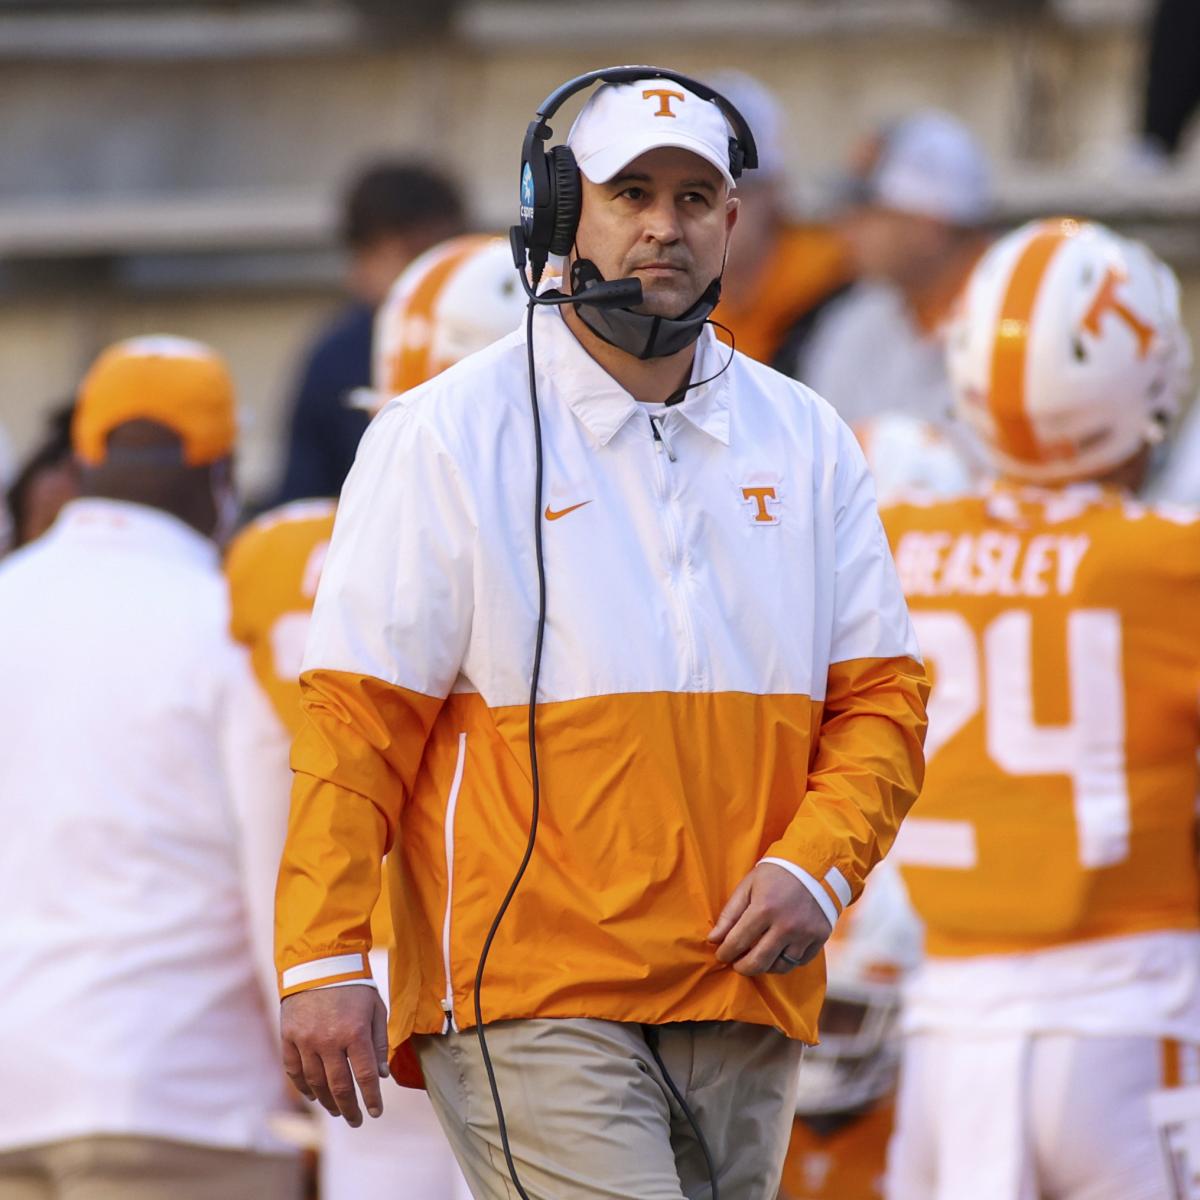 Fable: Tennessee Investigating Its Soccer Program for Recruiting Violations